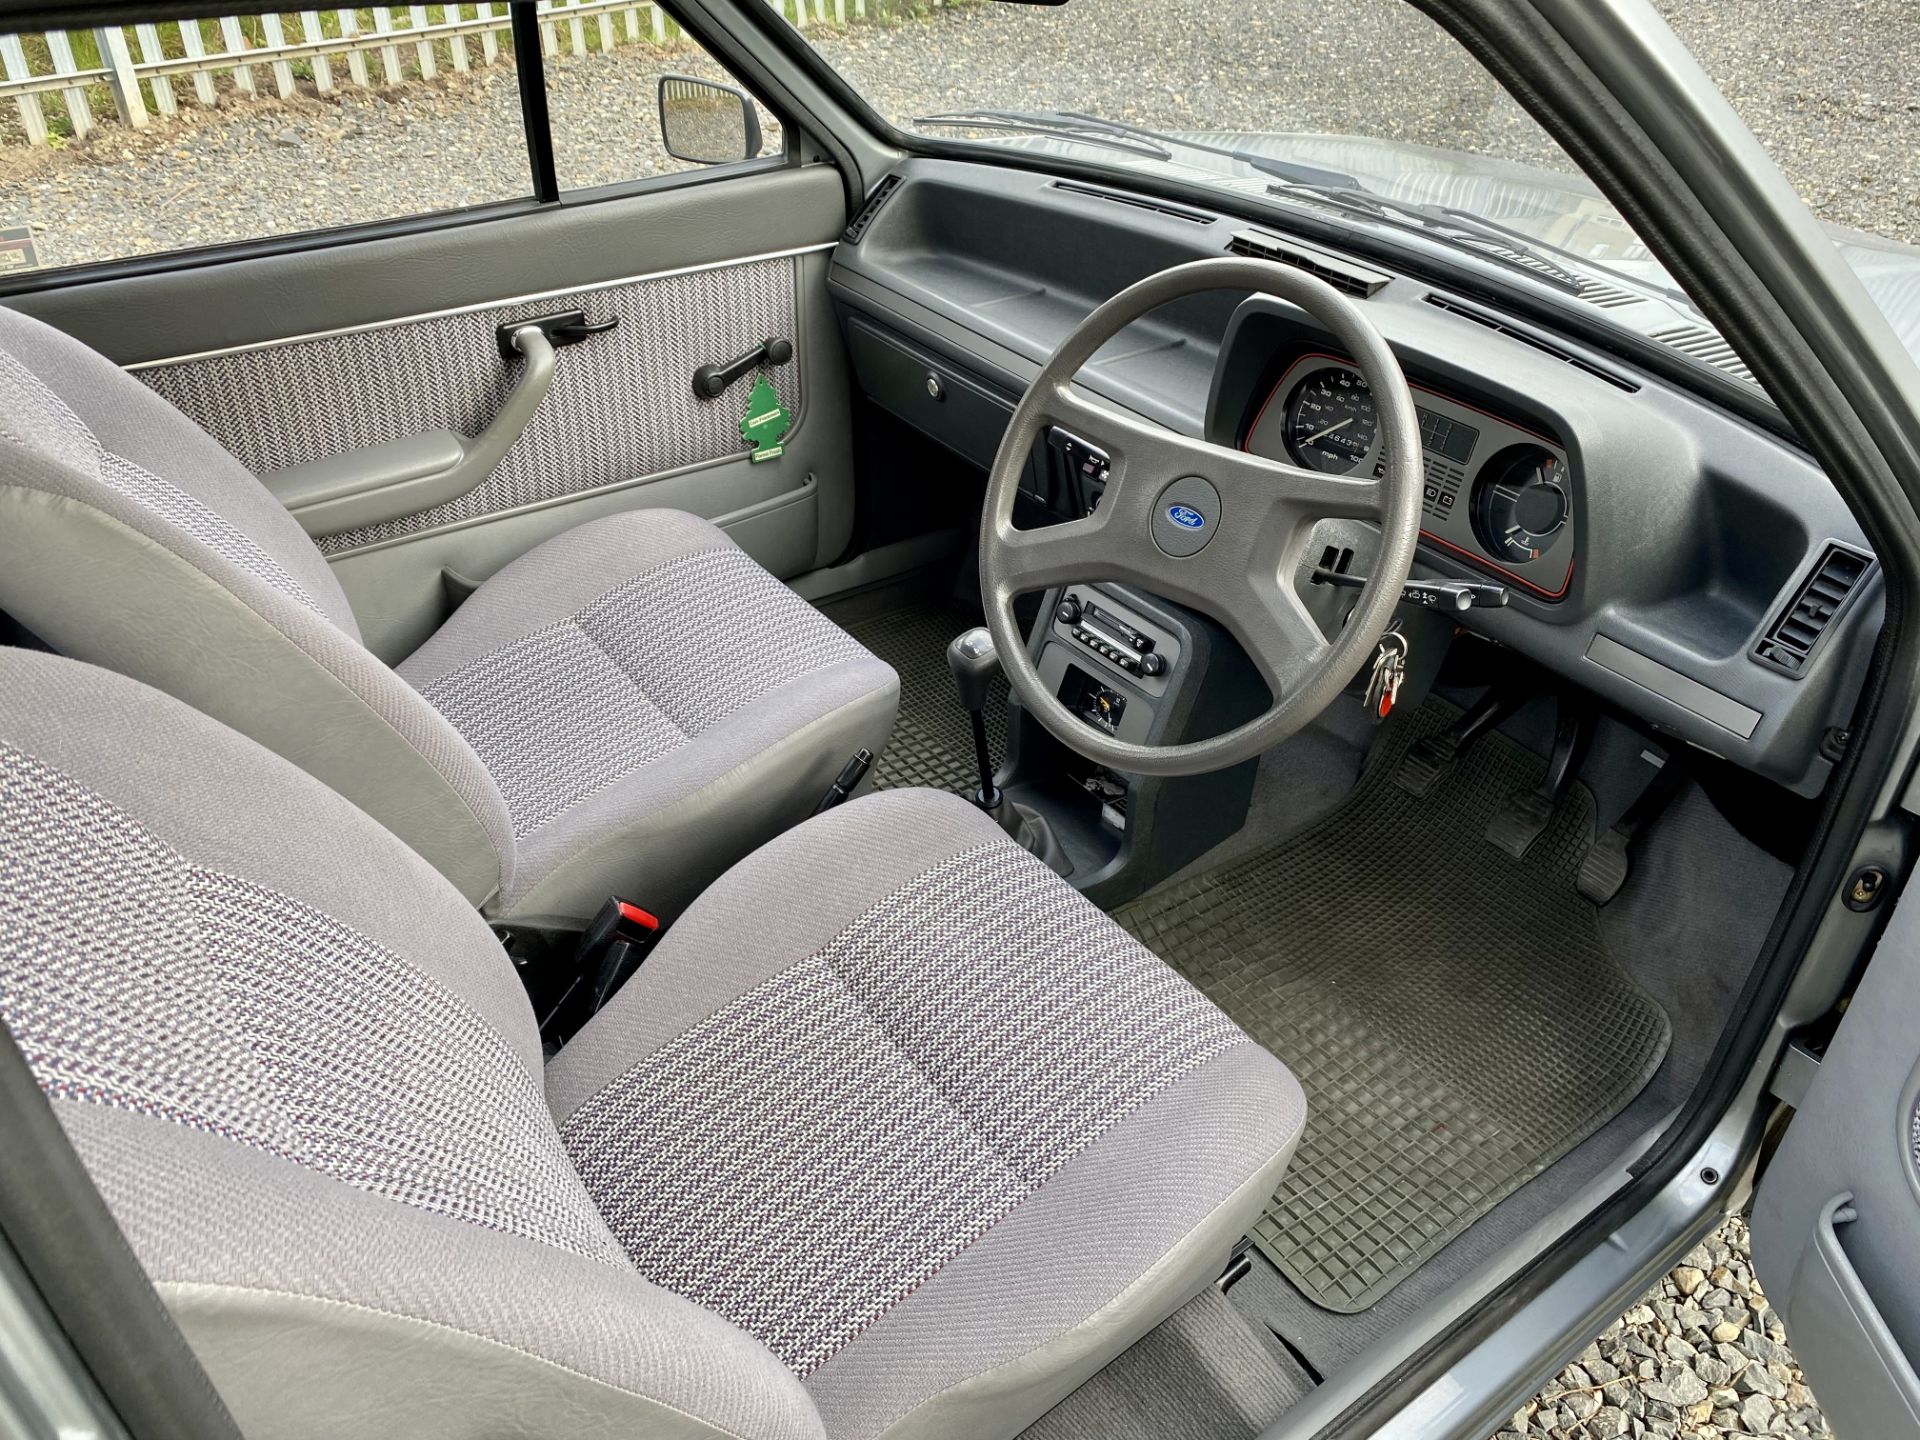 Ford Fiesta MK1 Finesse - Image 33 of 53